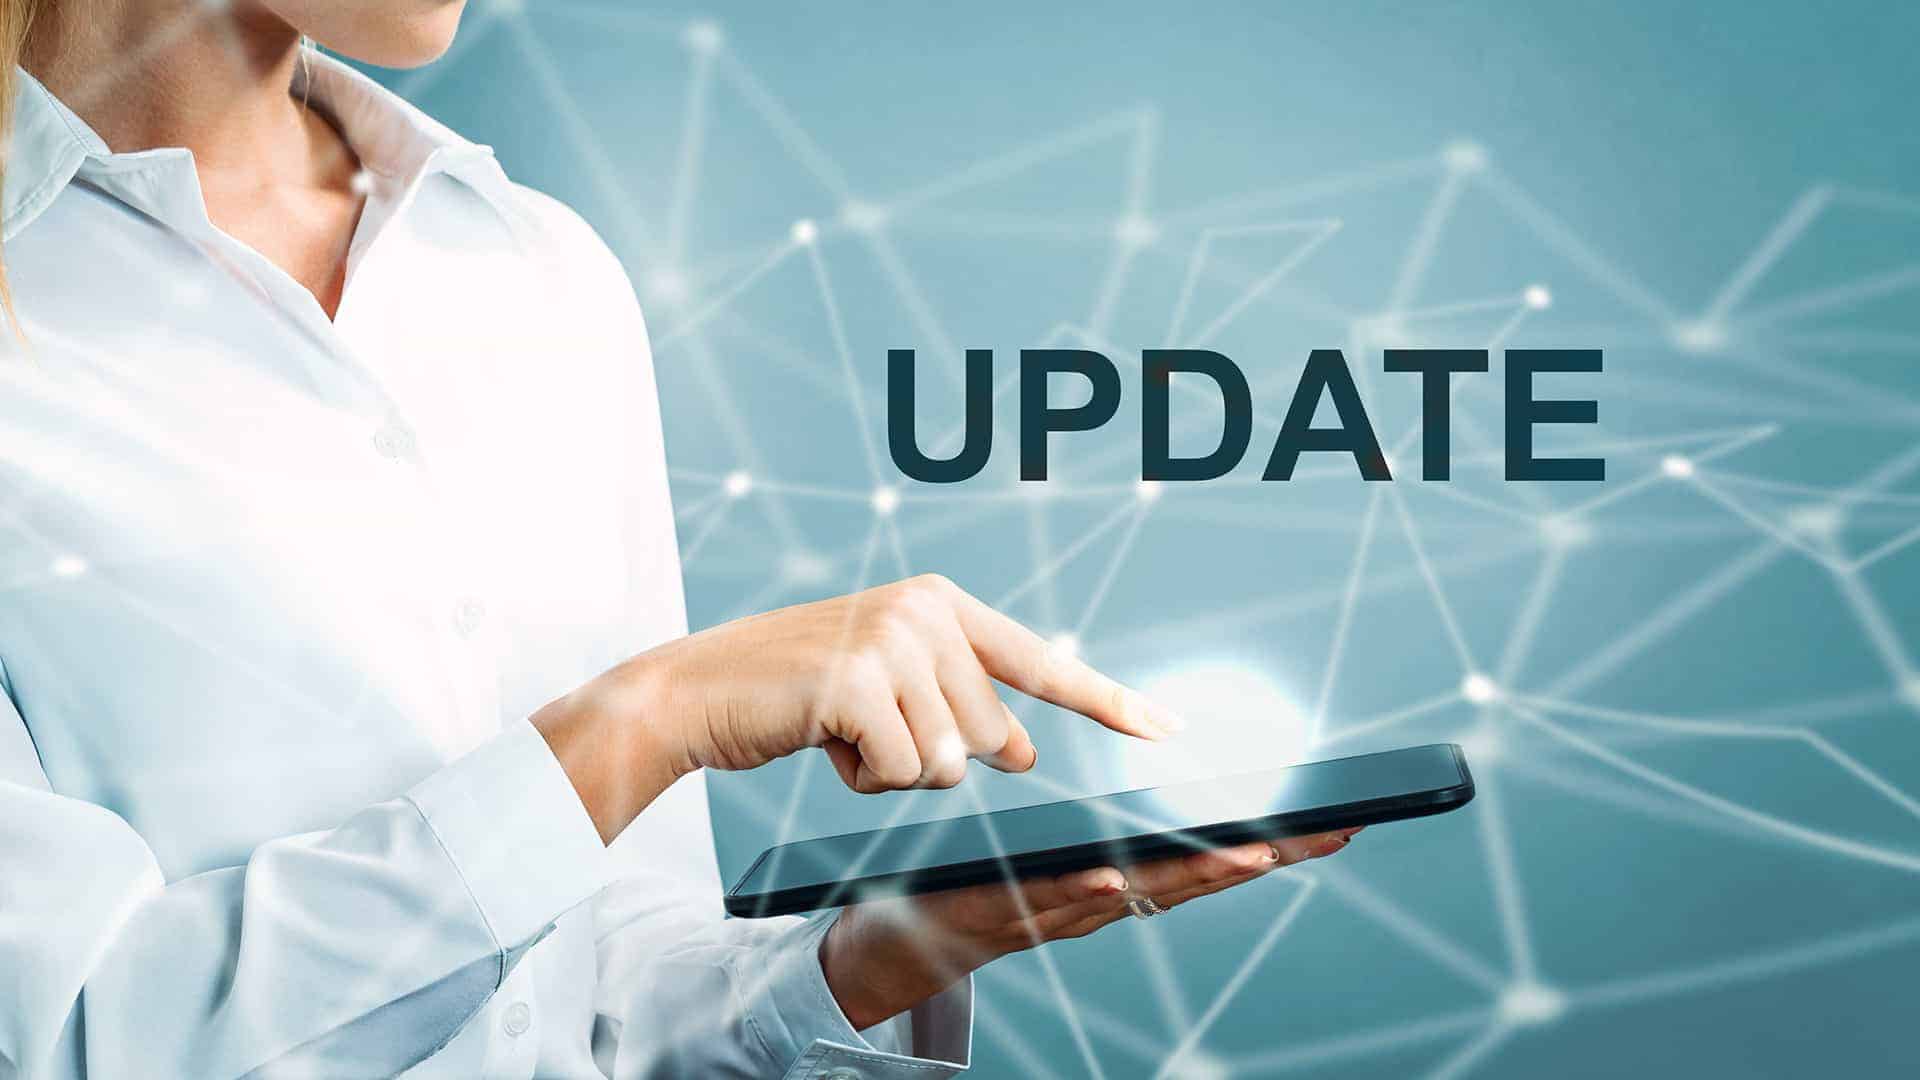 ComplyARM releases Stingray update